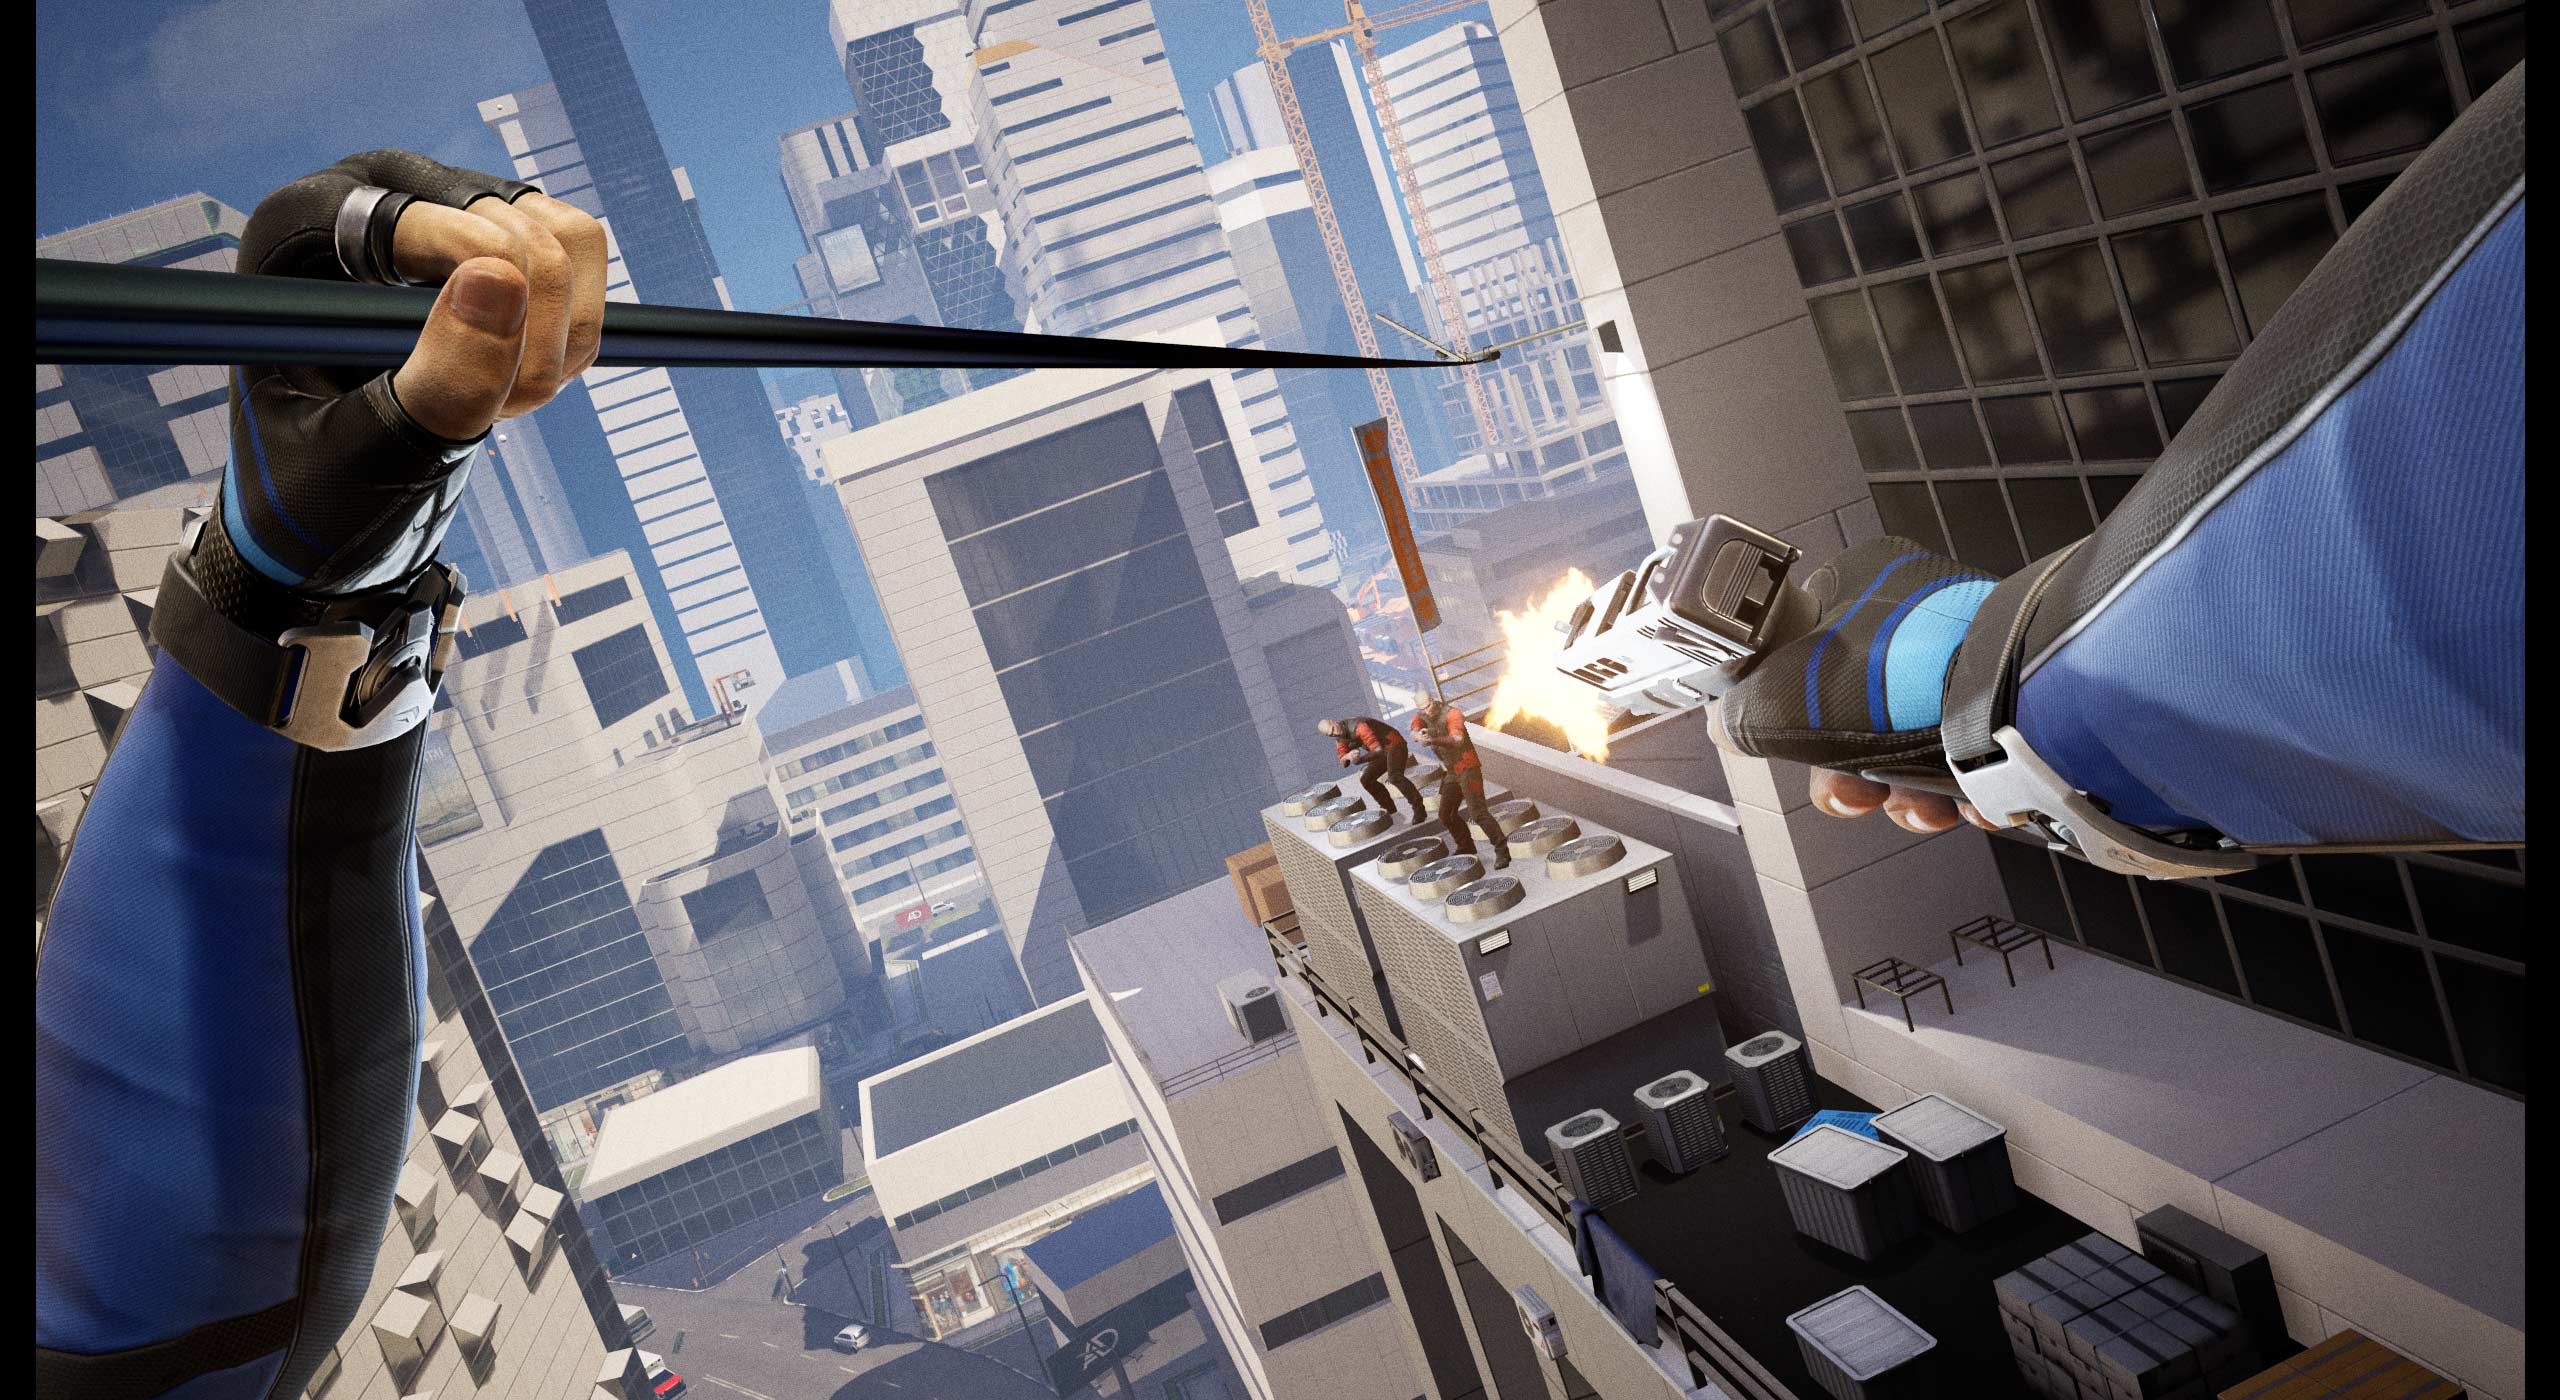 All Mirror's Edge games released so far - check prices & availability